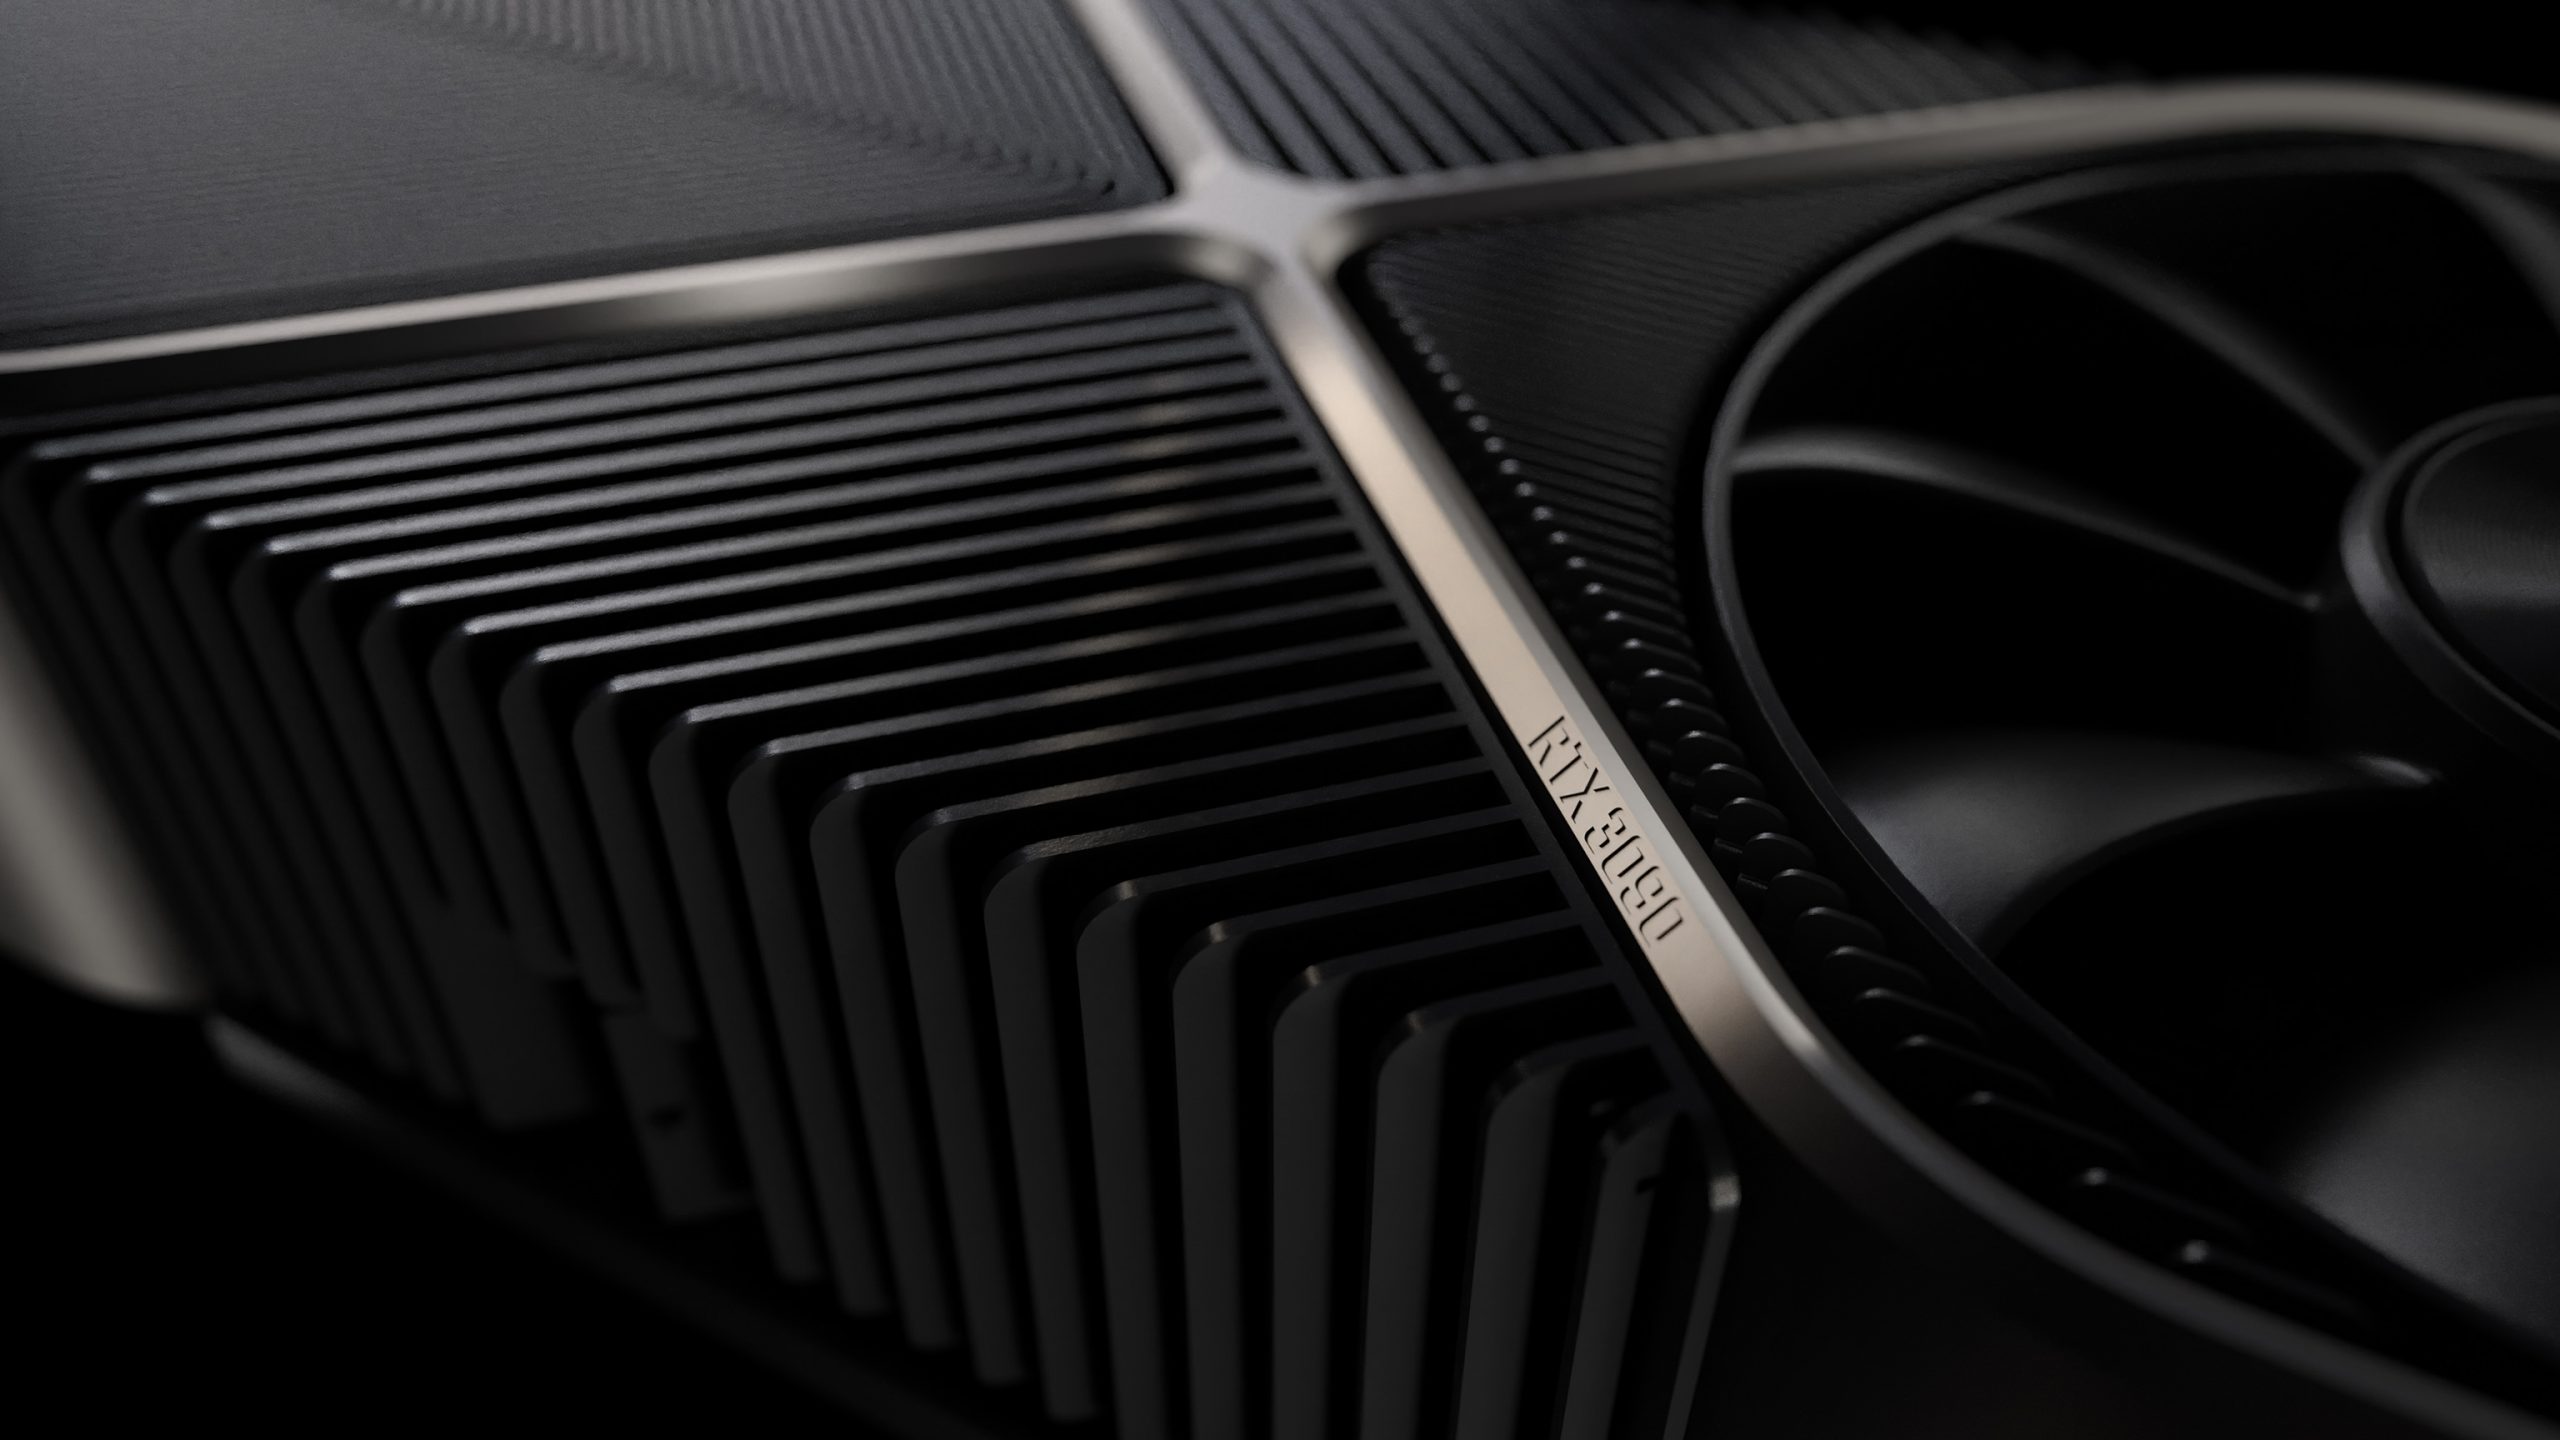 GeForce RTX 40 Series Will Reportedly Have Higher MSRPs Than RTX 30 Series